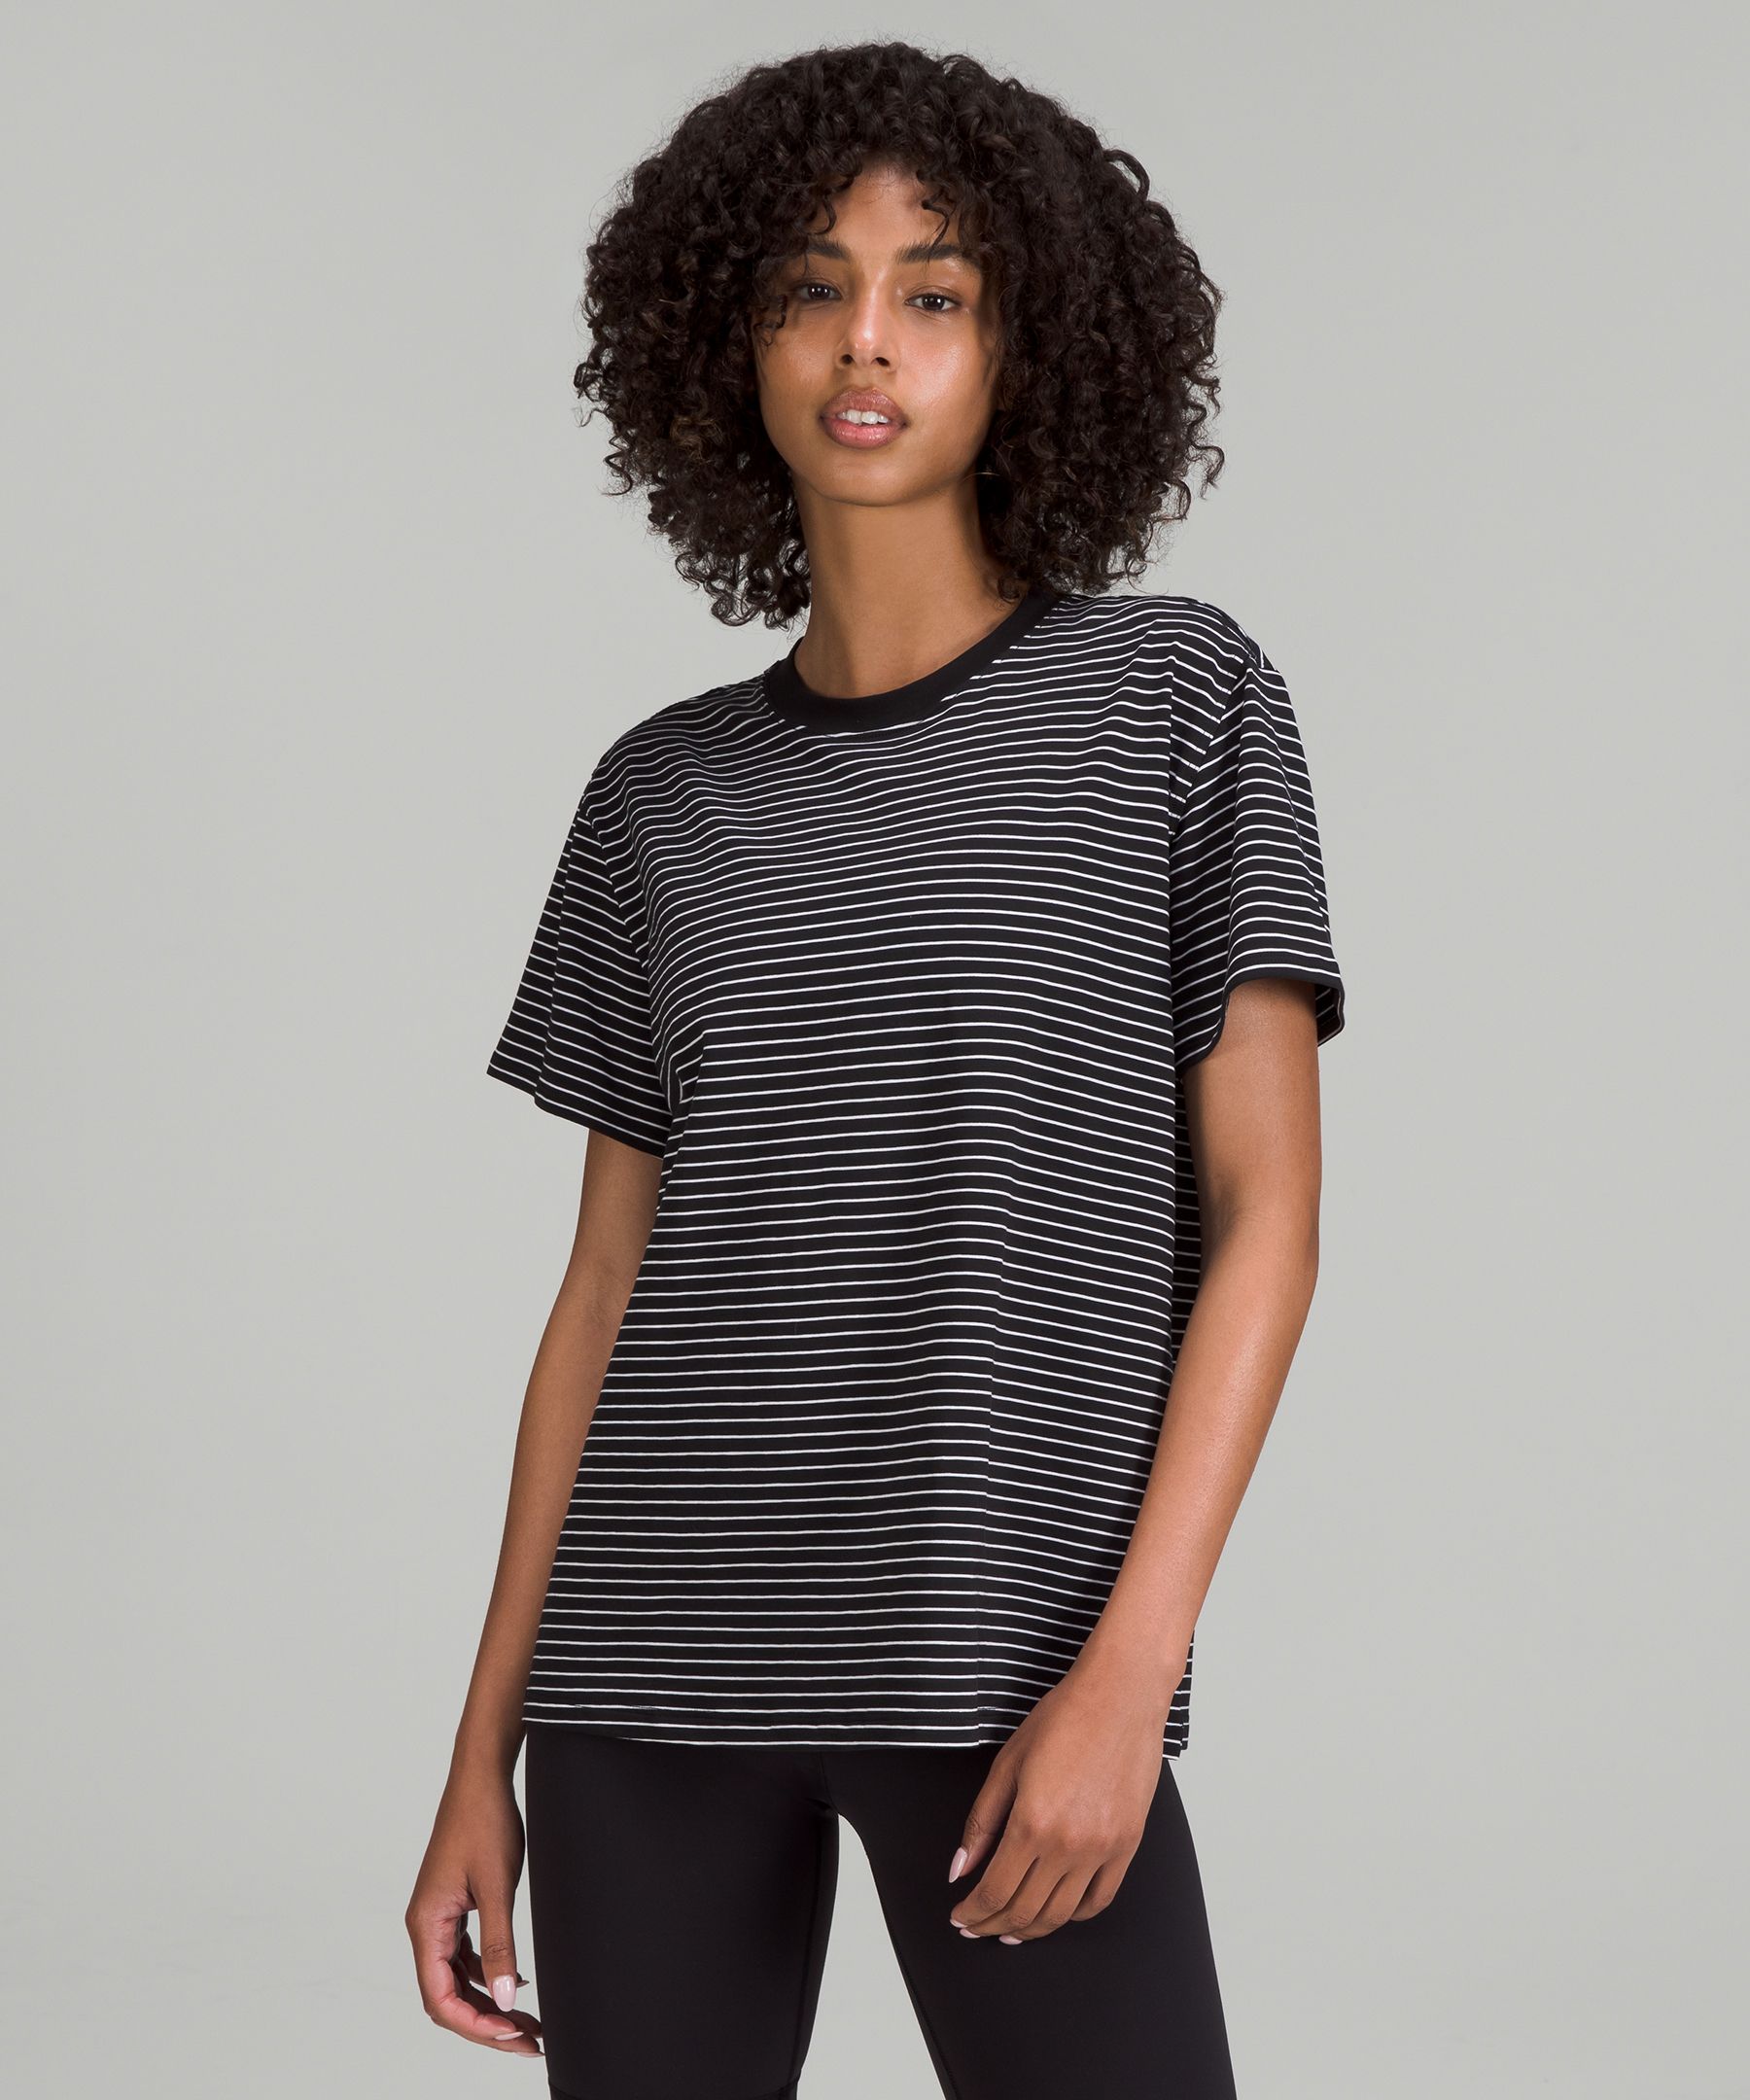 Lululemon All Yours Cotton T-shirt In Parallel Stripe Black White